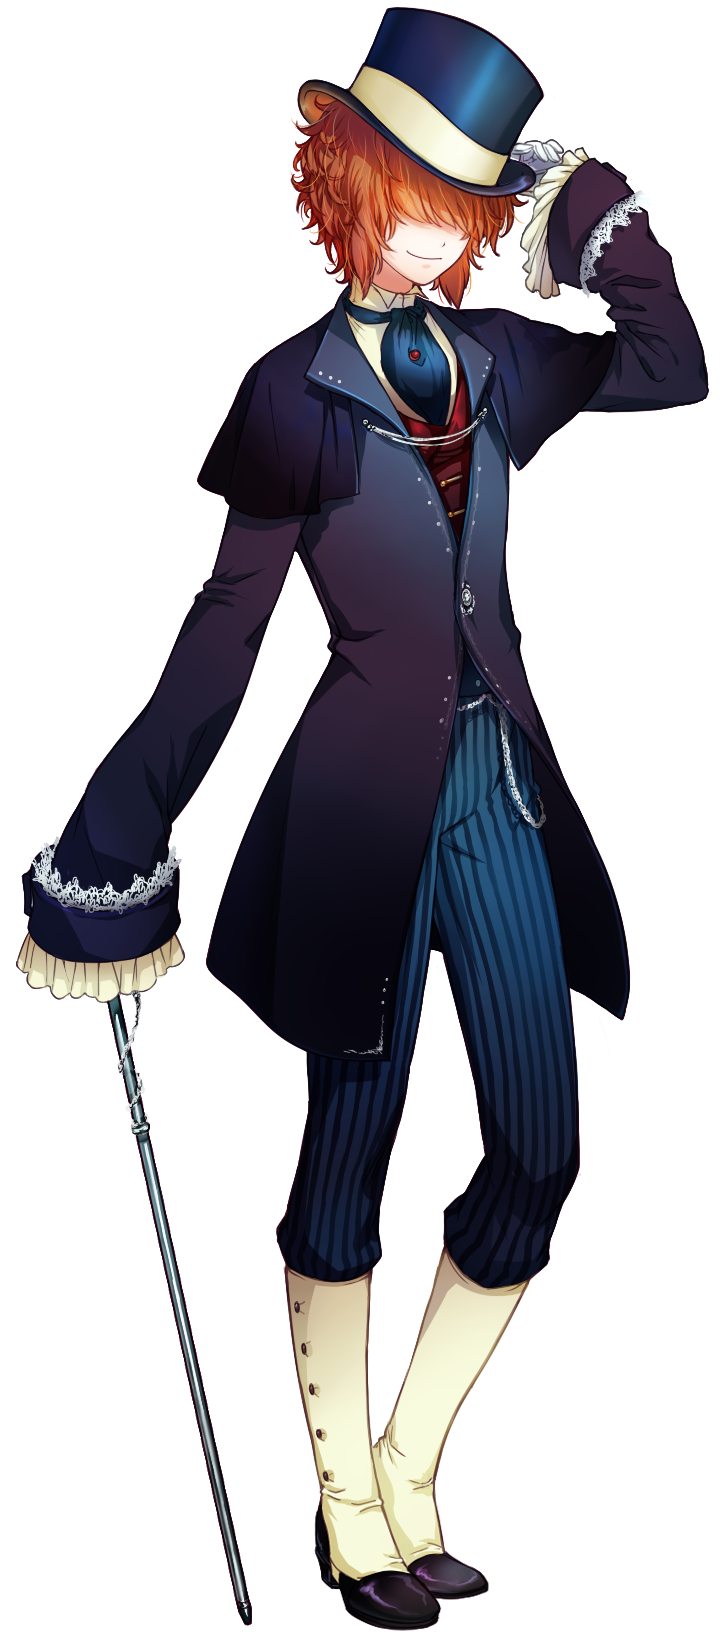 Male Anime Transparent Images